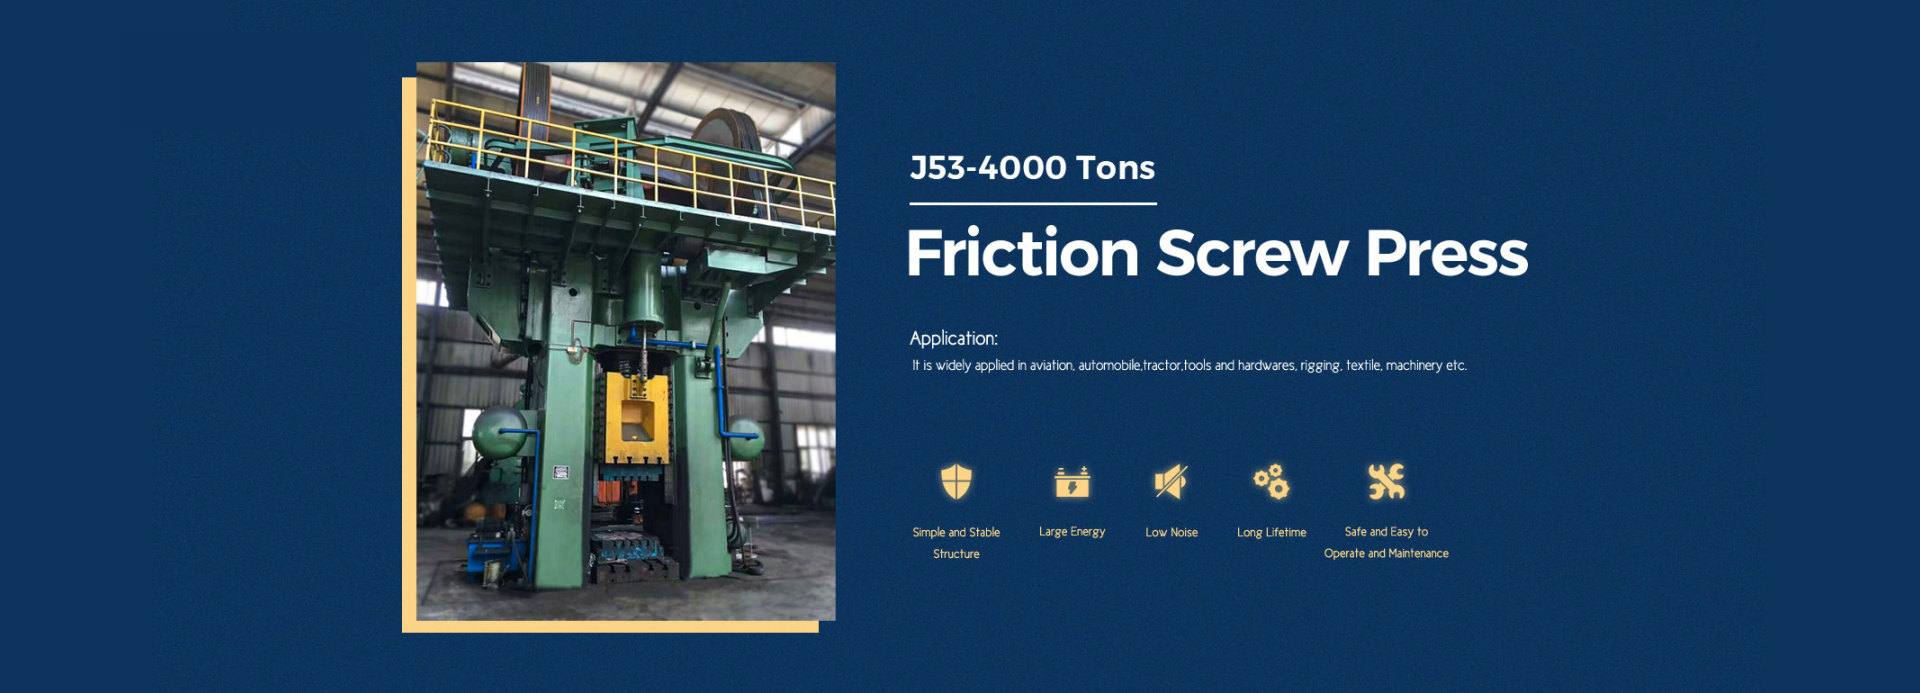 industrial metal press and friction screw press machine